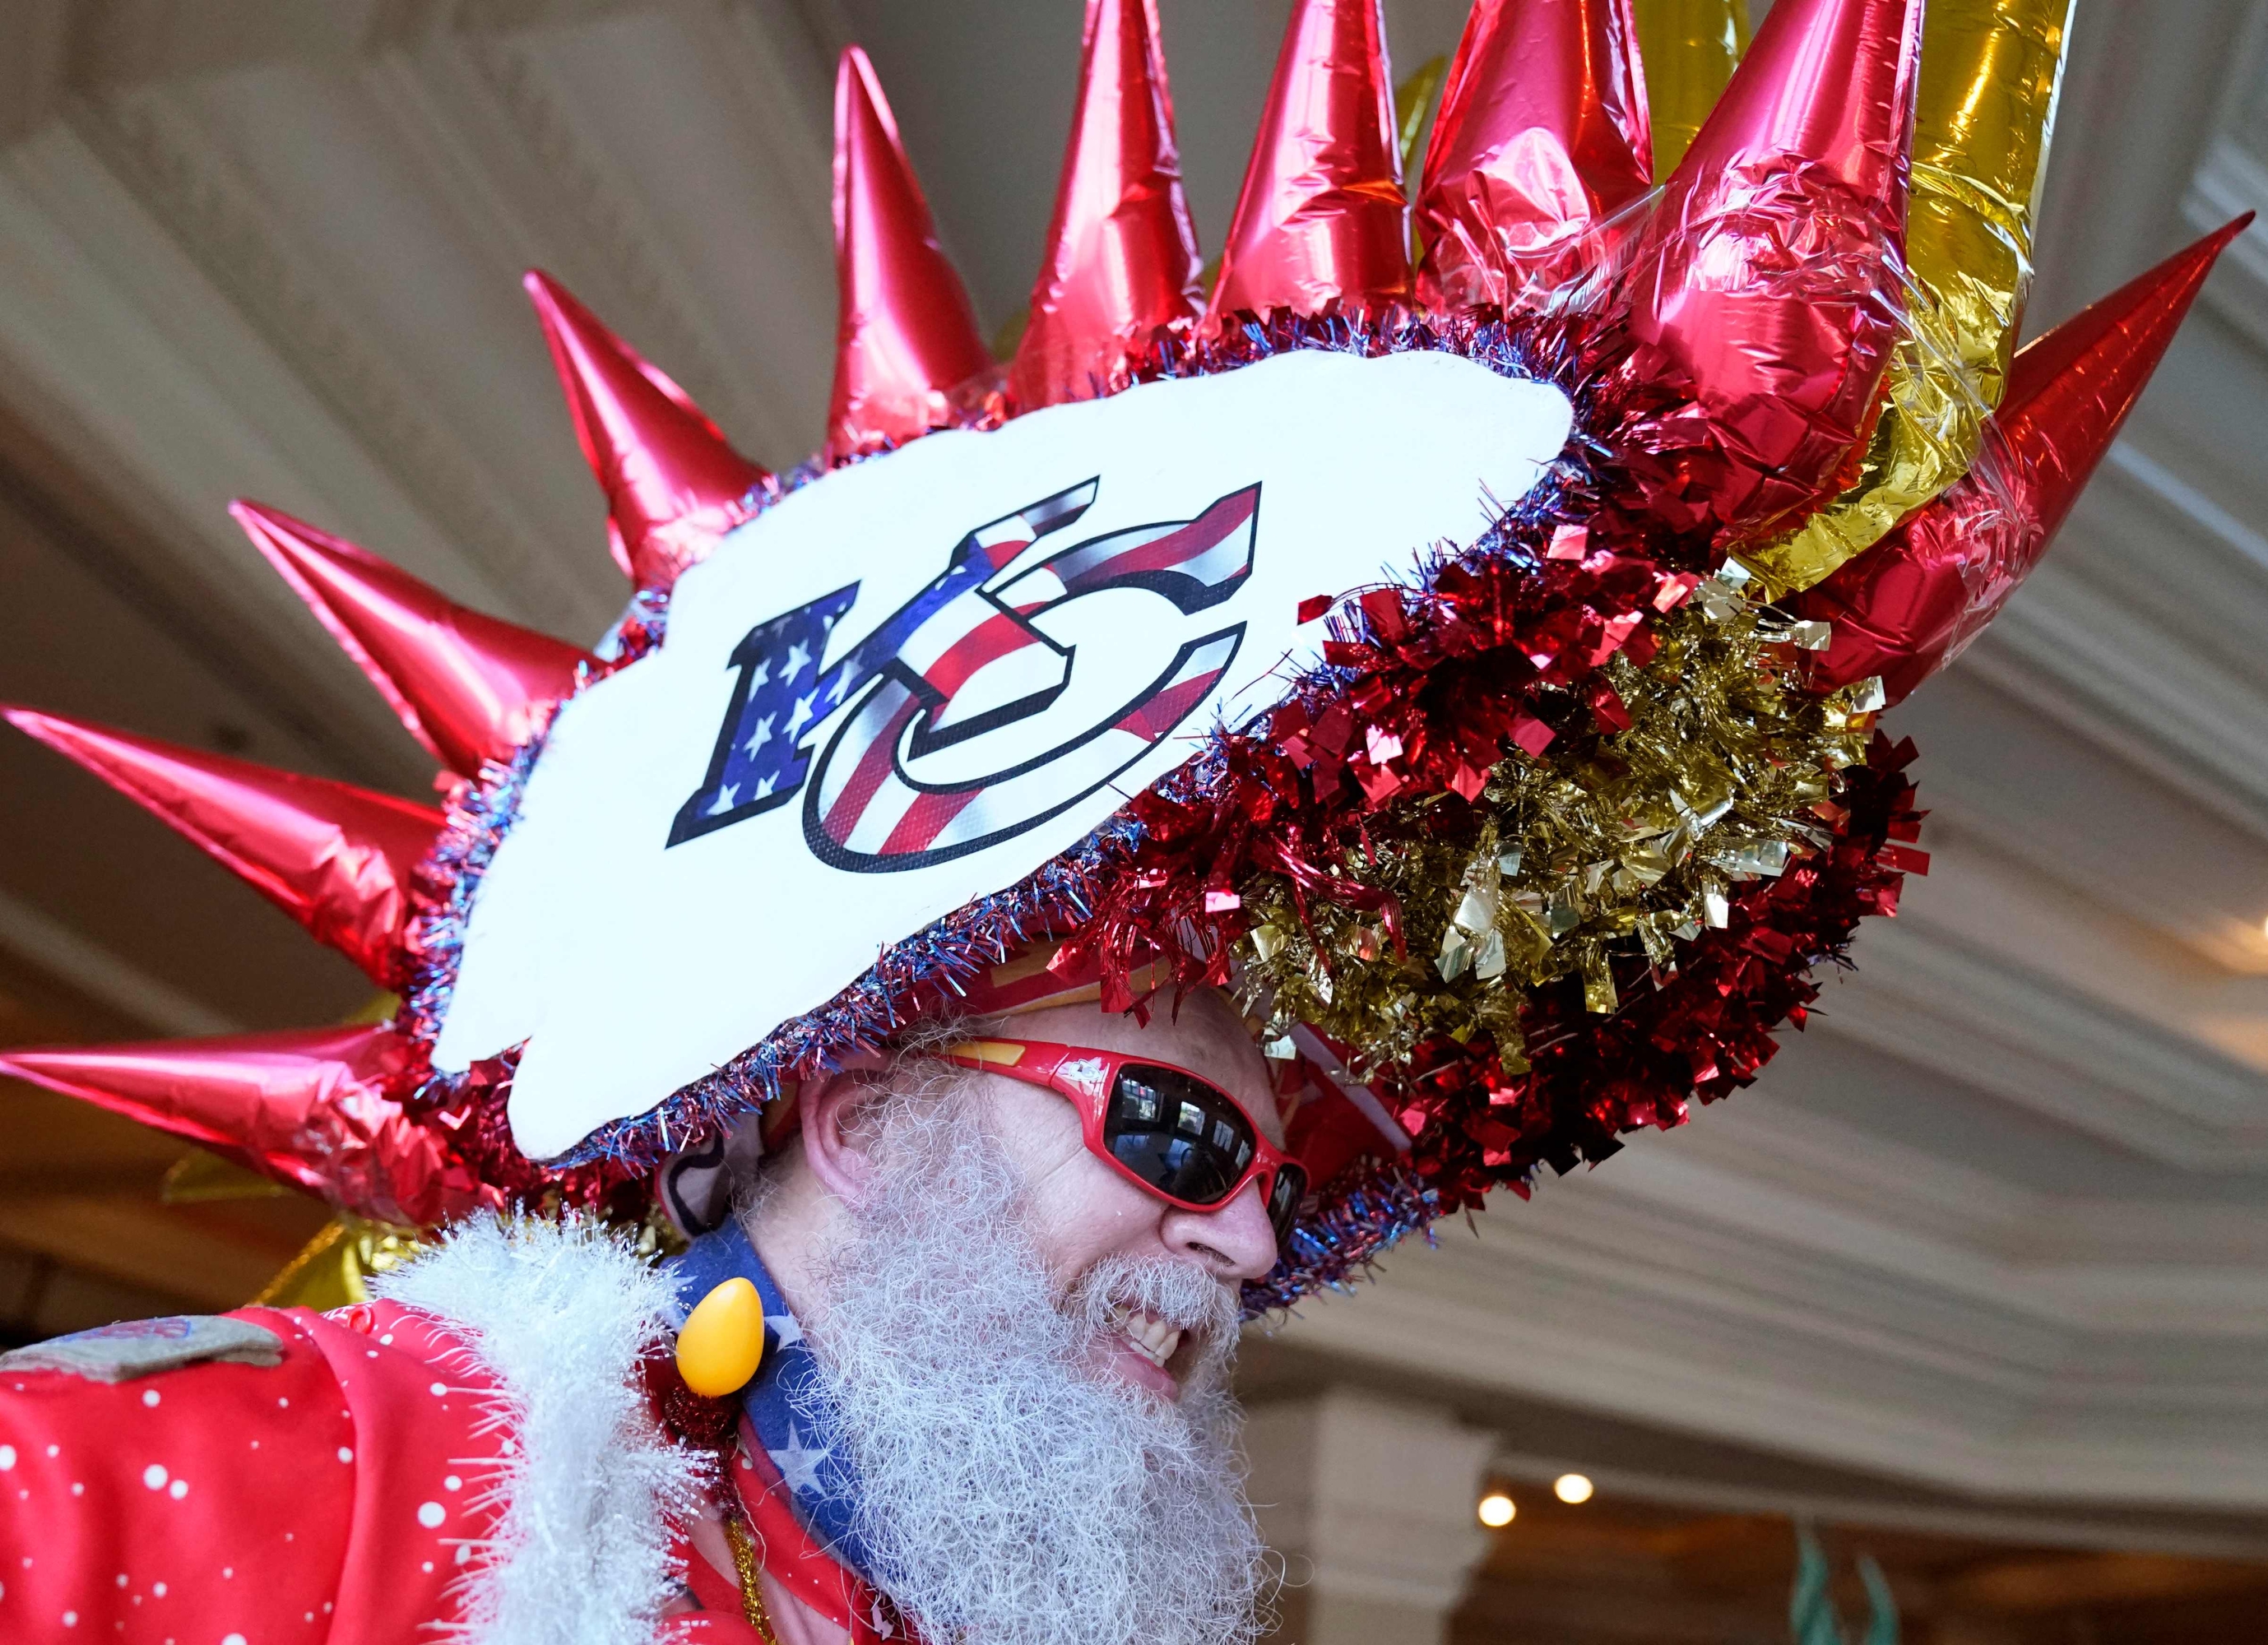 Kansas City Chiefs fan Don Lobmeyer, of Wichita, Kansas poses for pictures  ahead of Super Bowl LVIII at Allegiant Stadium in Las Vegas, Nevada on February 9, 2024. (Photo by TIMOTHY A. CLARY / AFP)